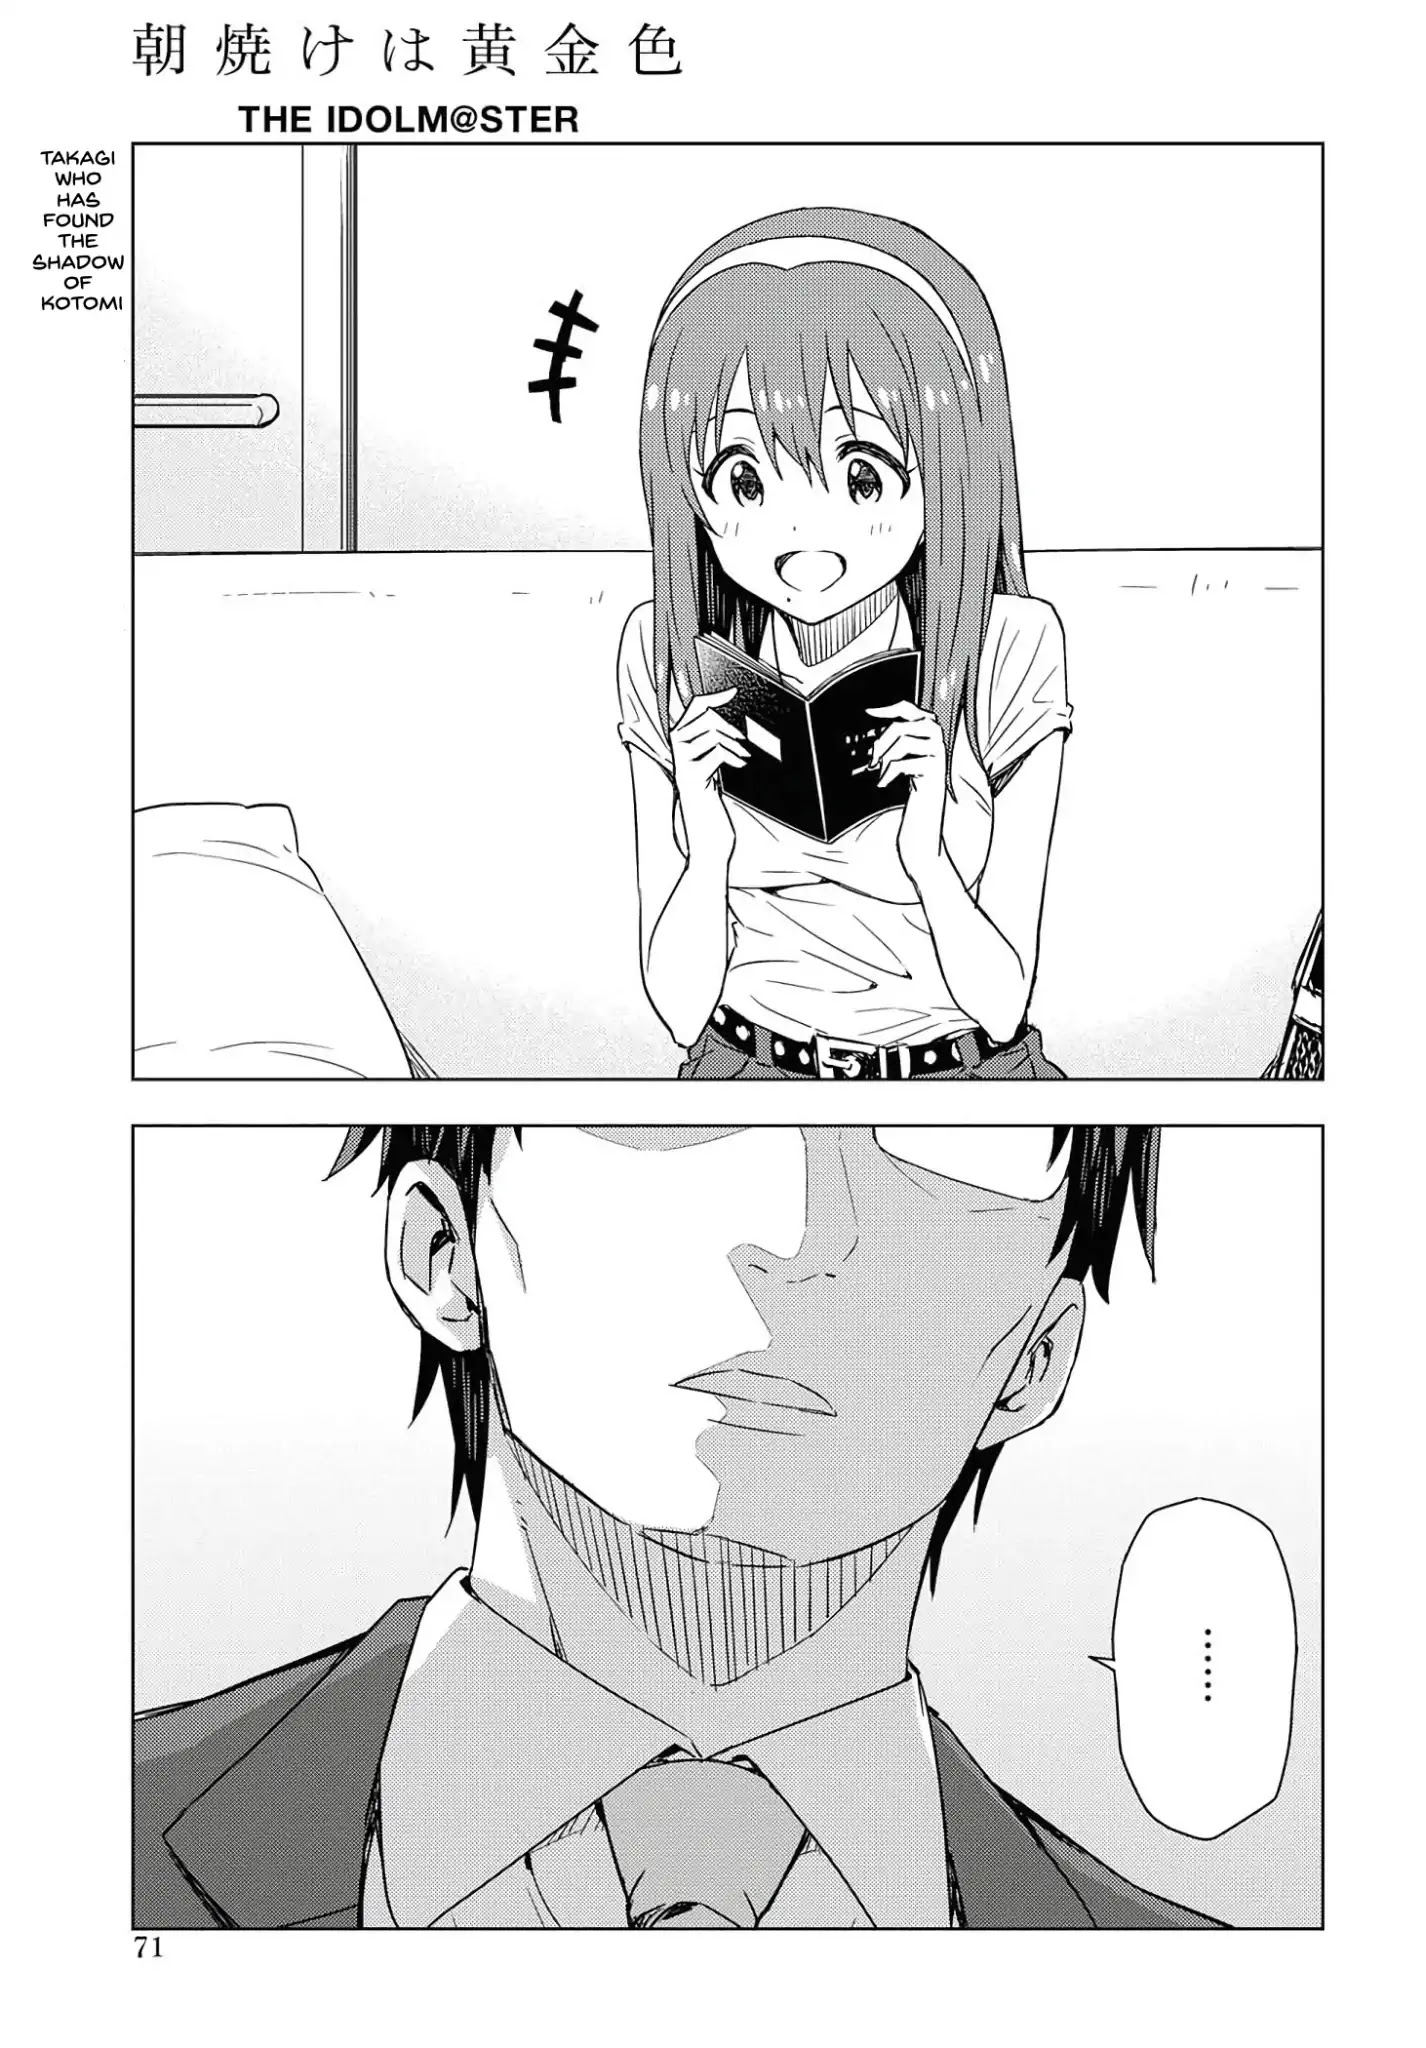 The Idolm@ster: Asayake Wa Koganeiro Chapter 16: The Truth About Kotomi That Takagi Will Tell - Picture 1